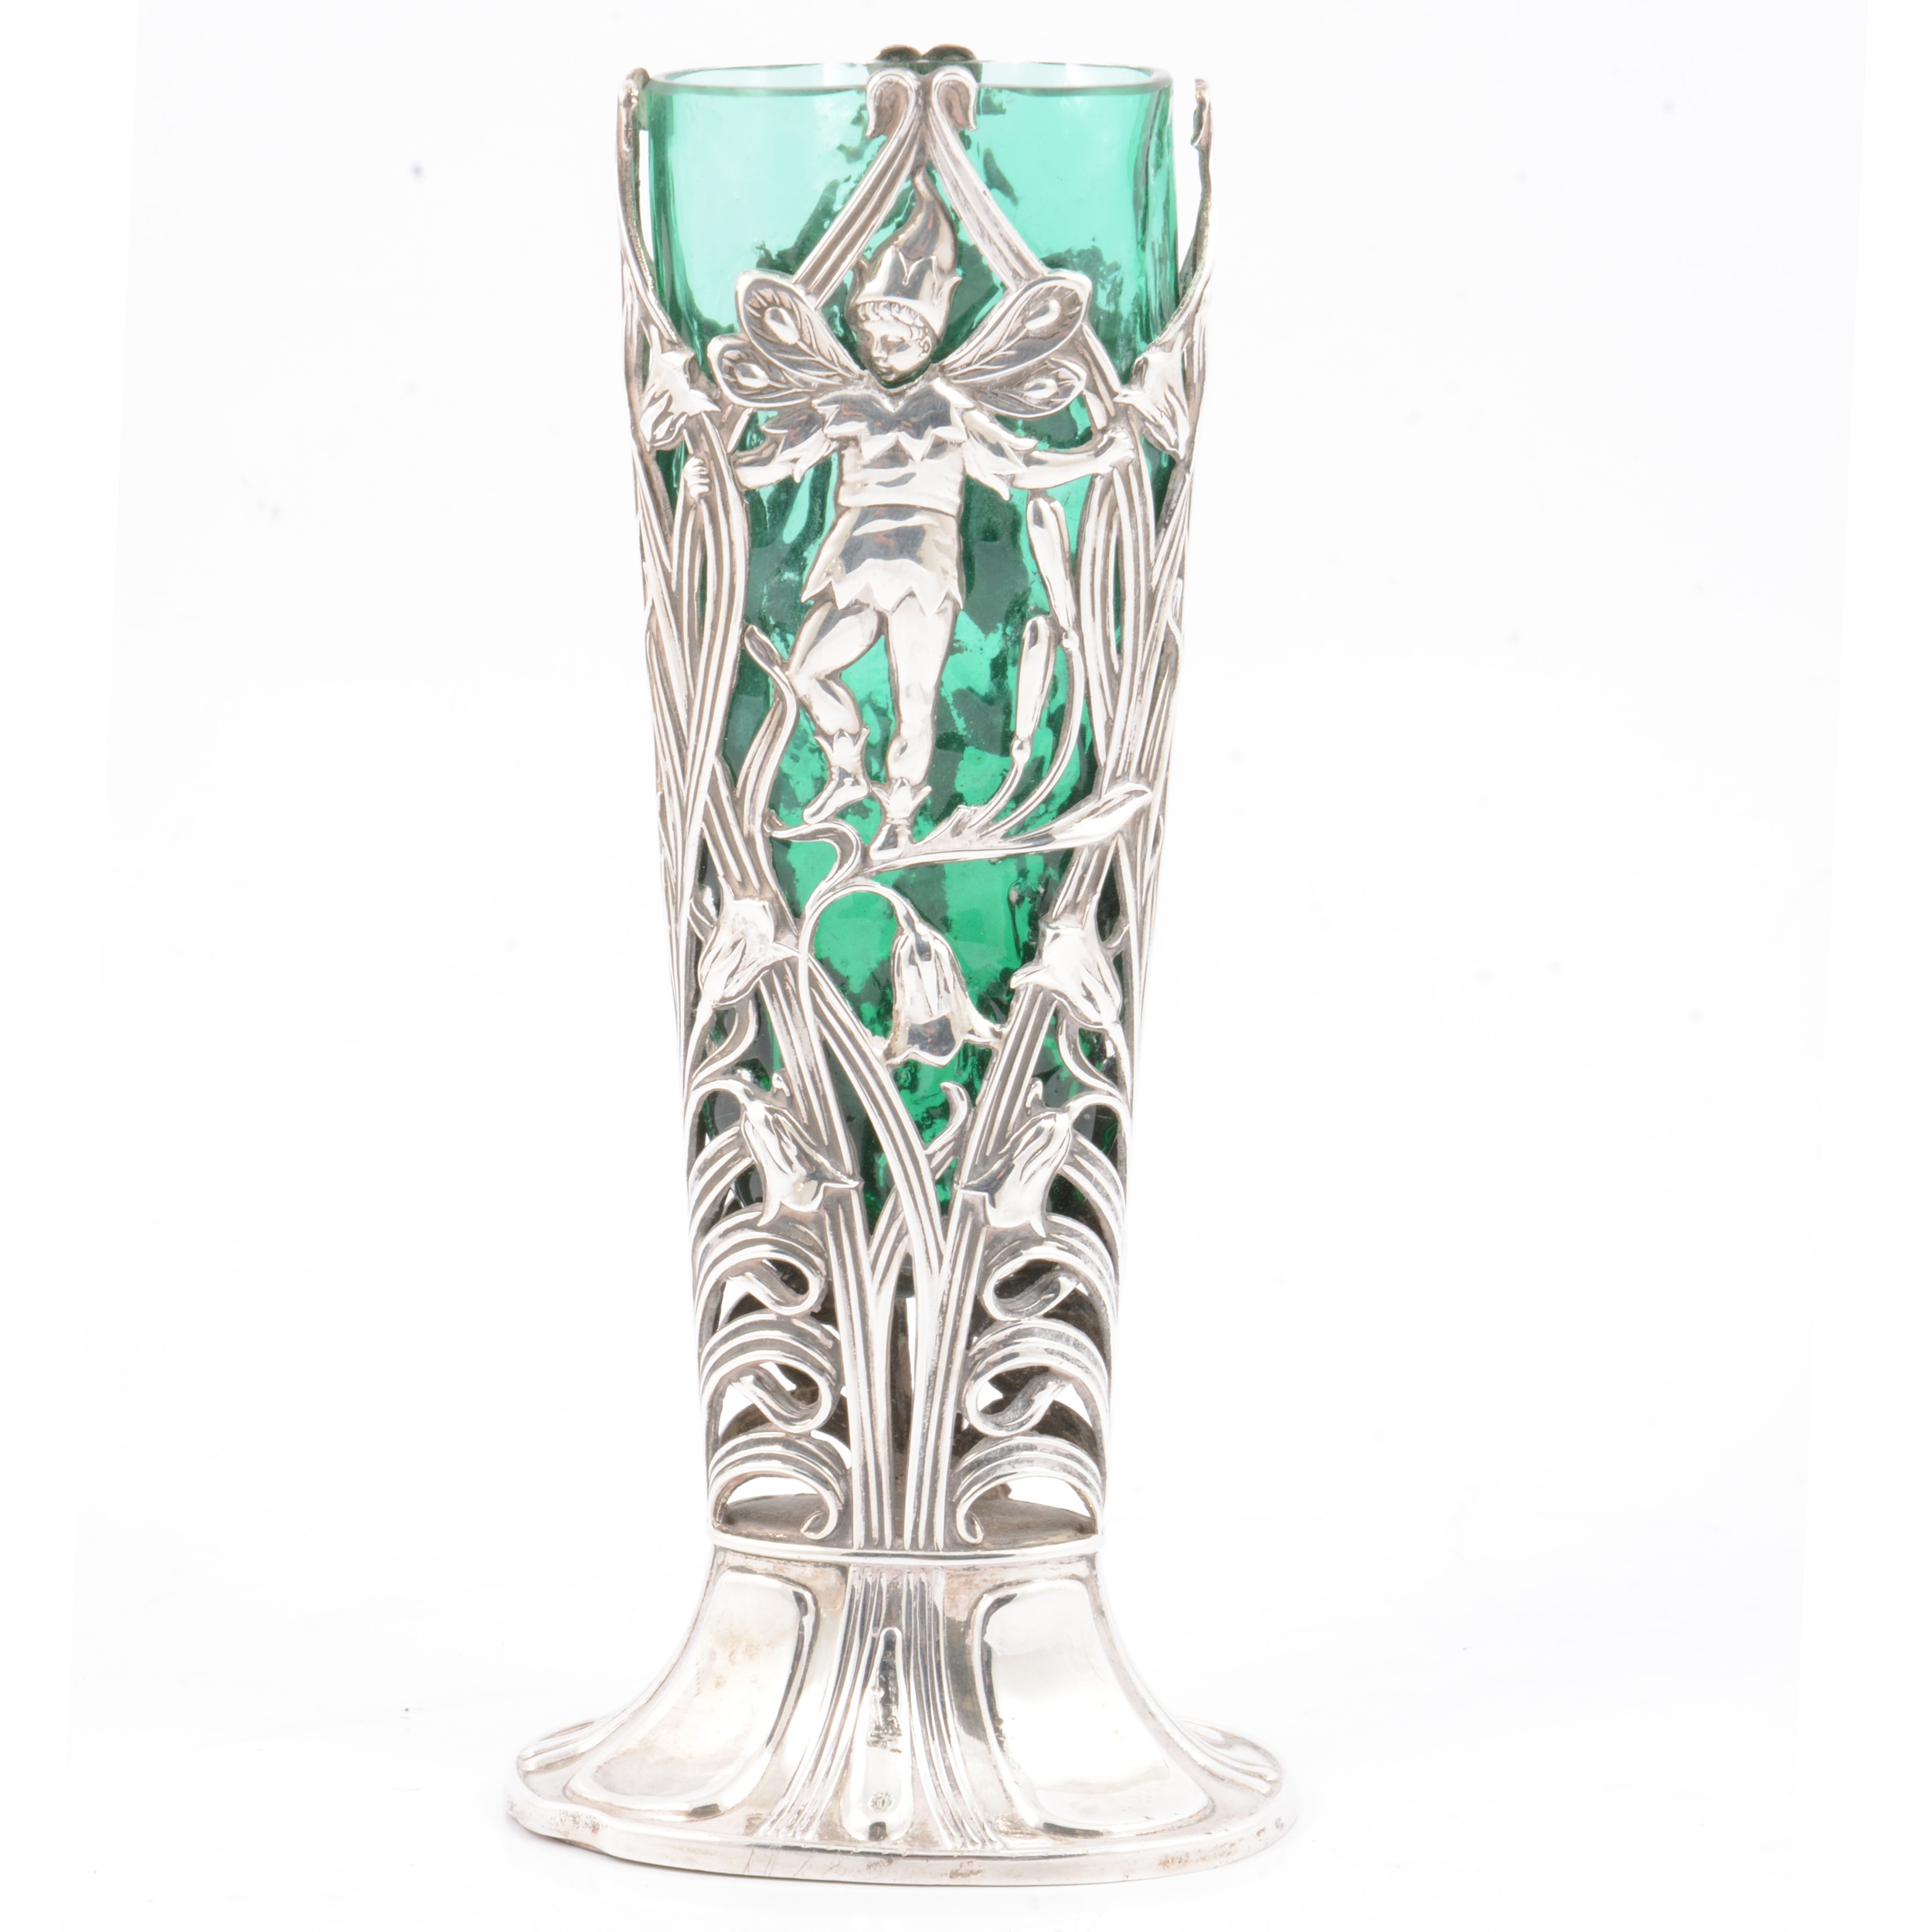 English Art Nouveau silver and glass spill vase, Levi and Salaman, Birmingham. - Image 3 of 3